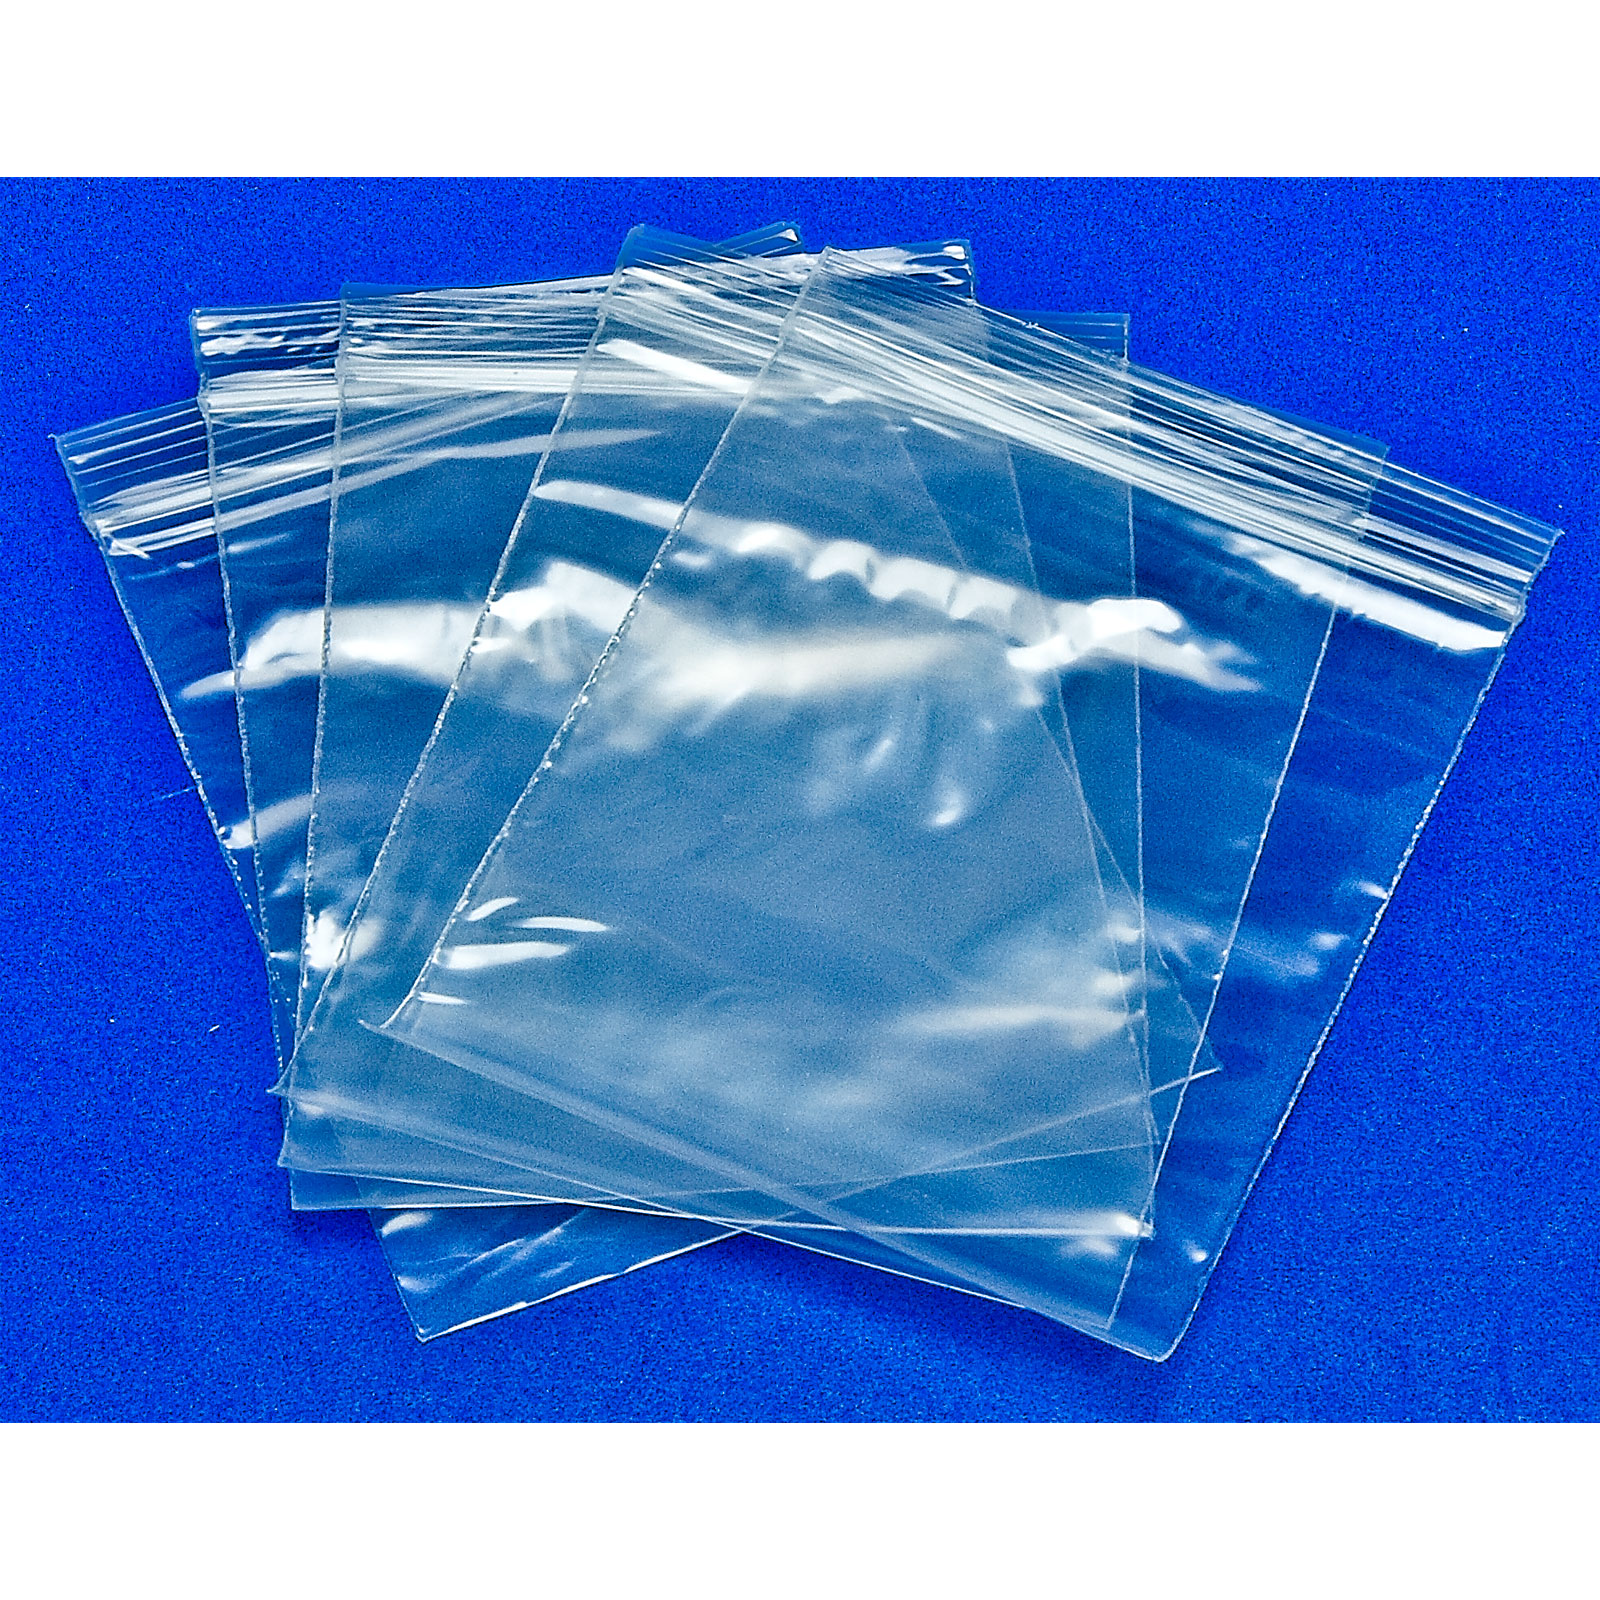 Leaf Design Small Clear Plastic Bags Baggy Grip Self Seal